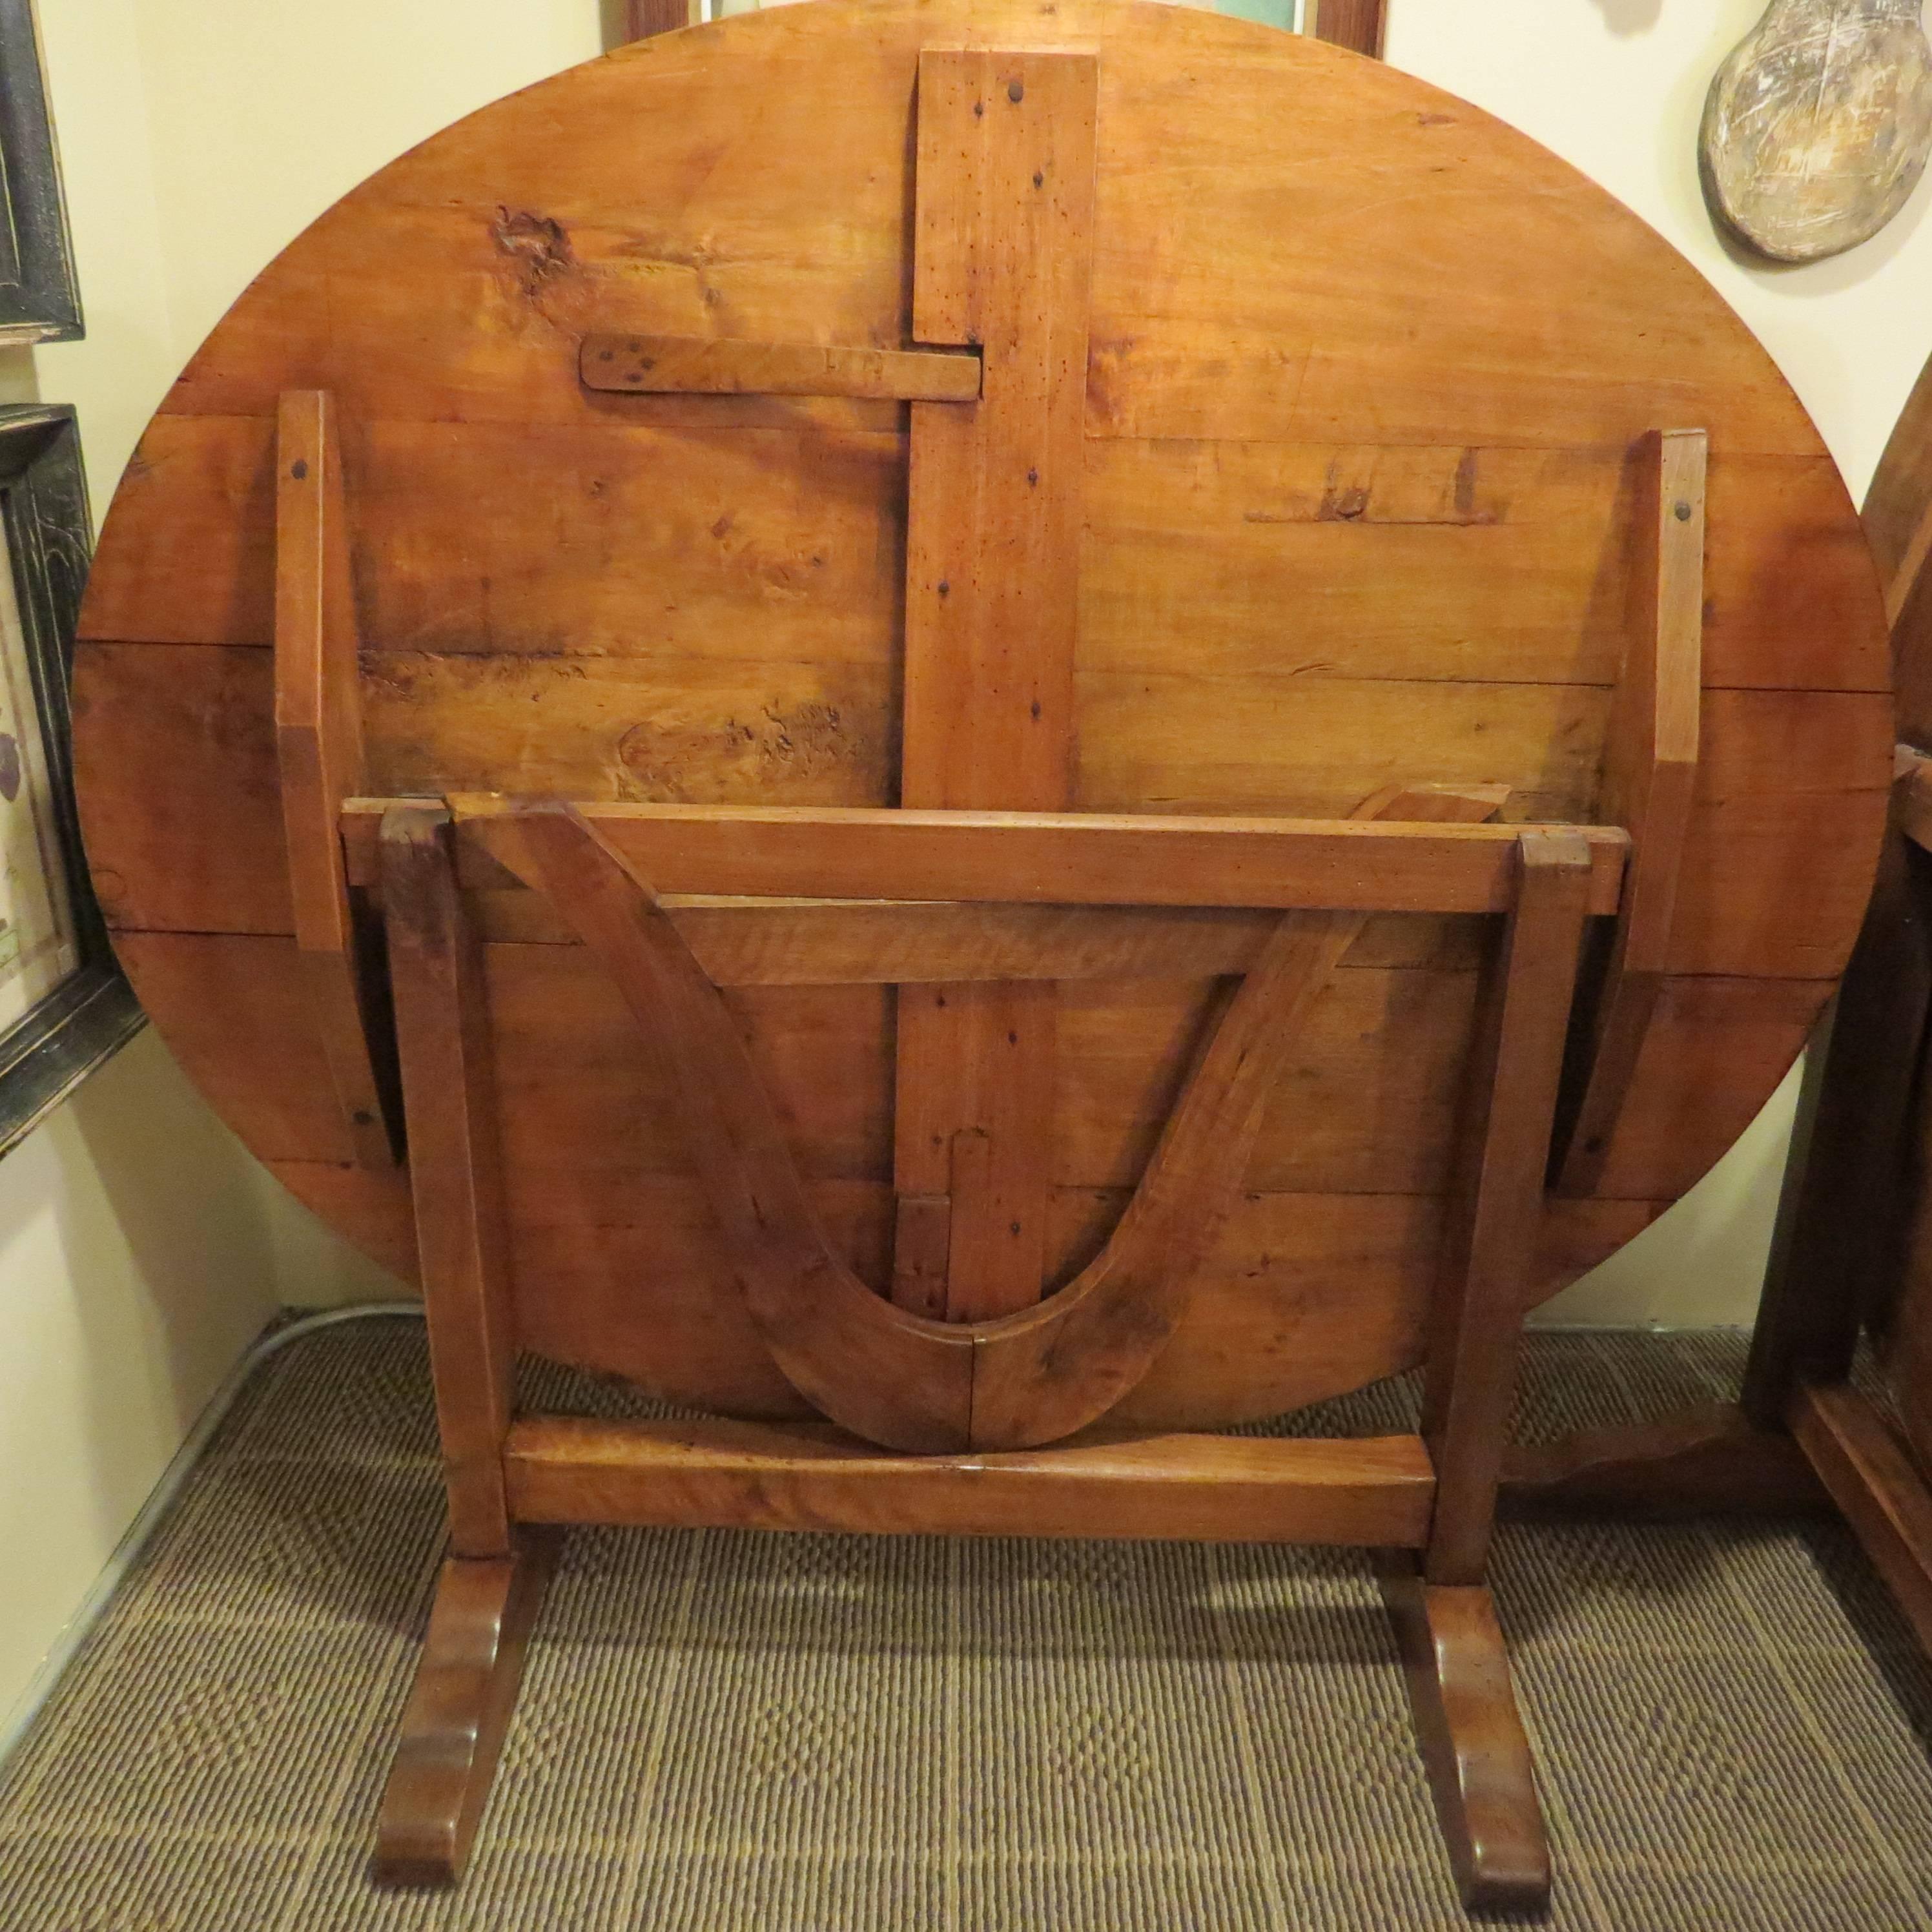 This 19th century handmade, wooden table is typical of the flip top style used in French wine callers. It can rest near the wall, or flip up for serving.